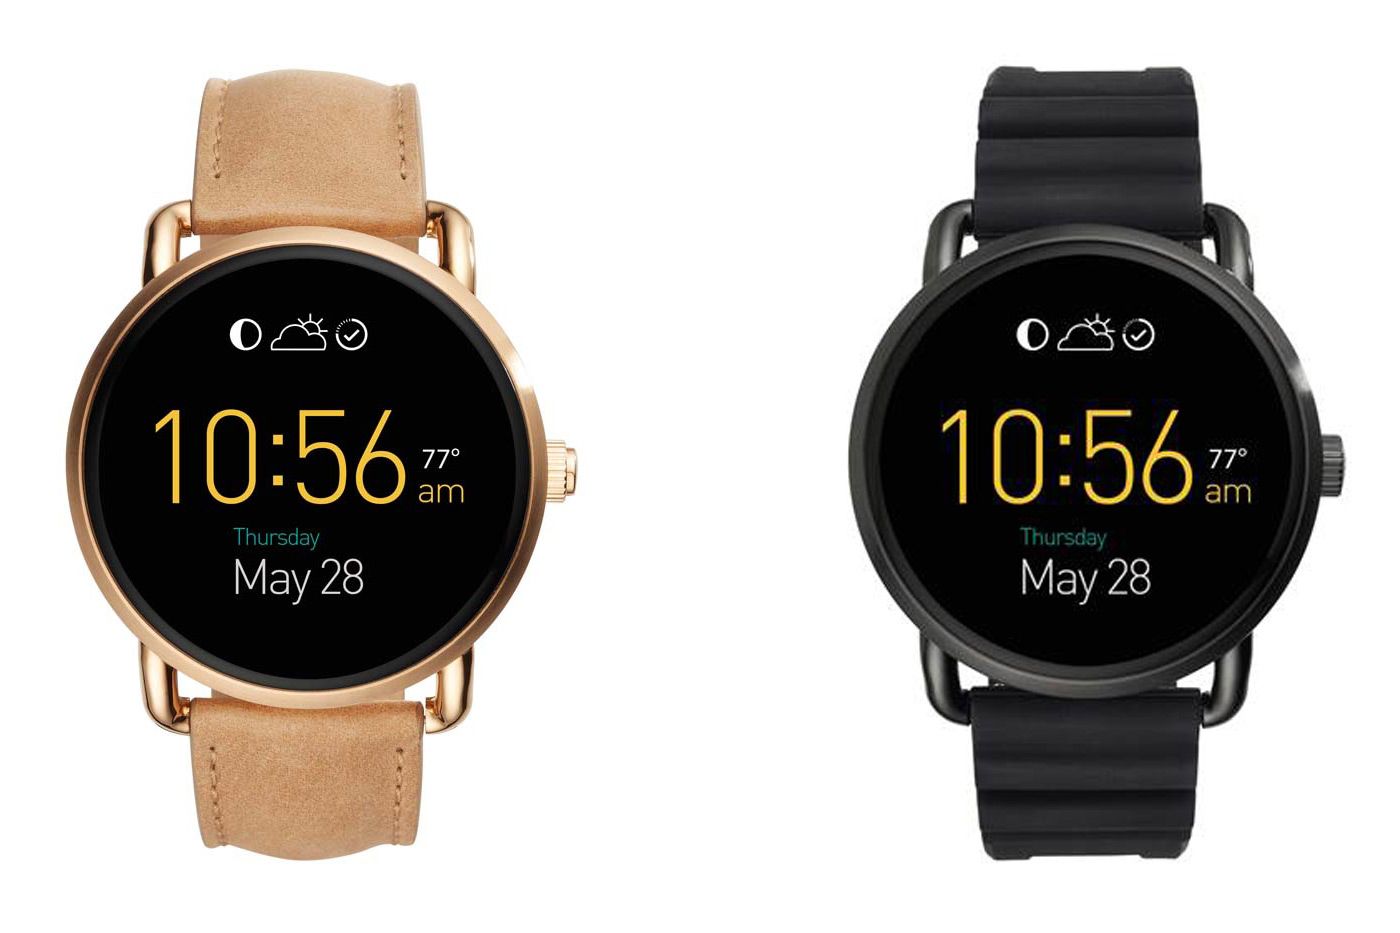 fossil s connected device lineup adds two android wear watches and more image 12